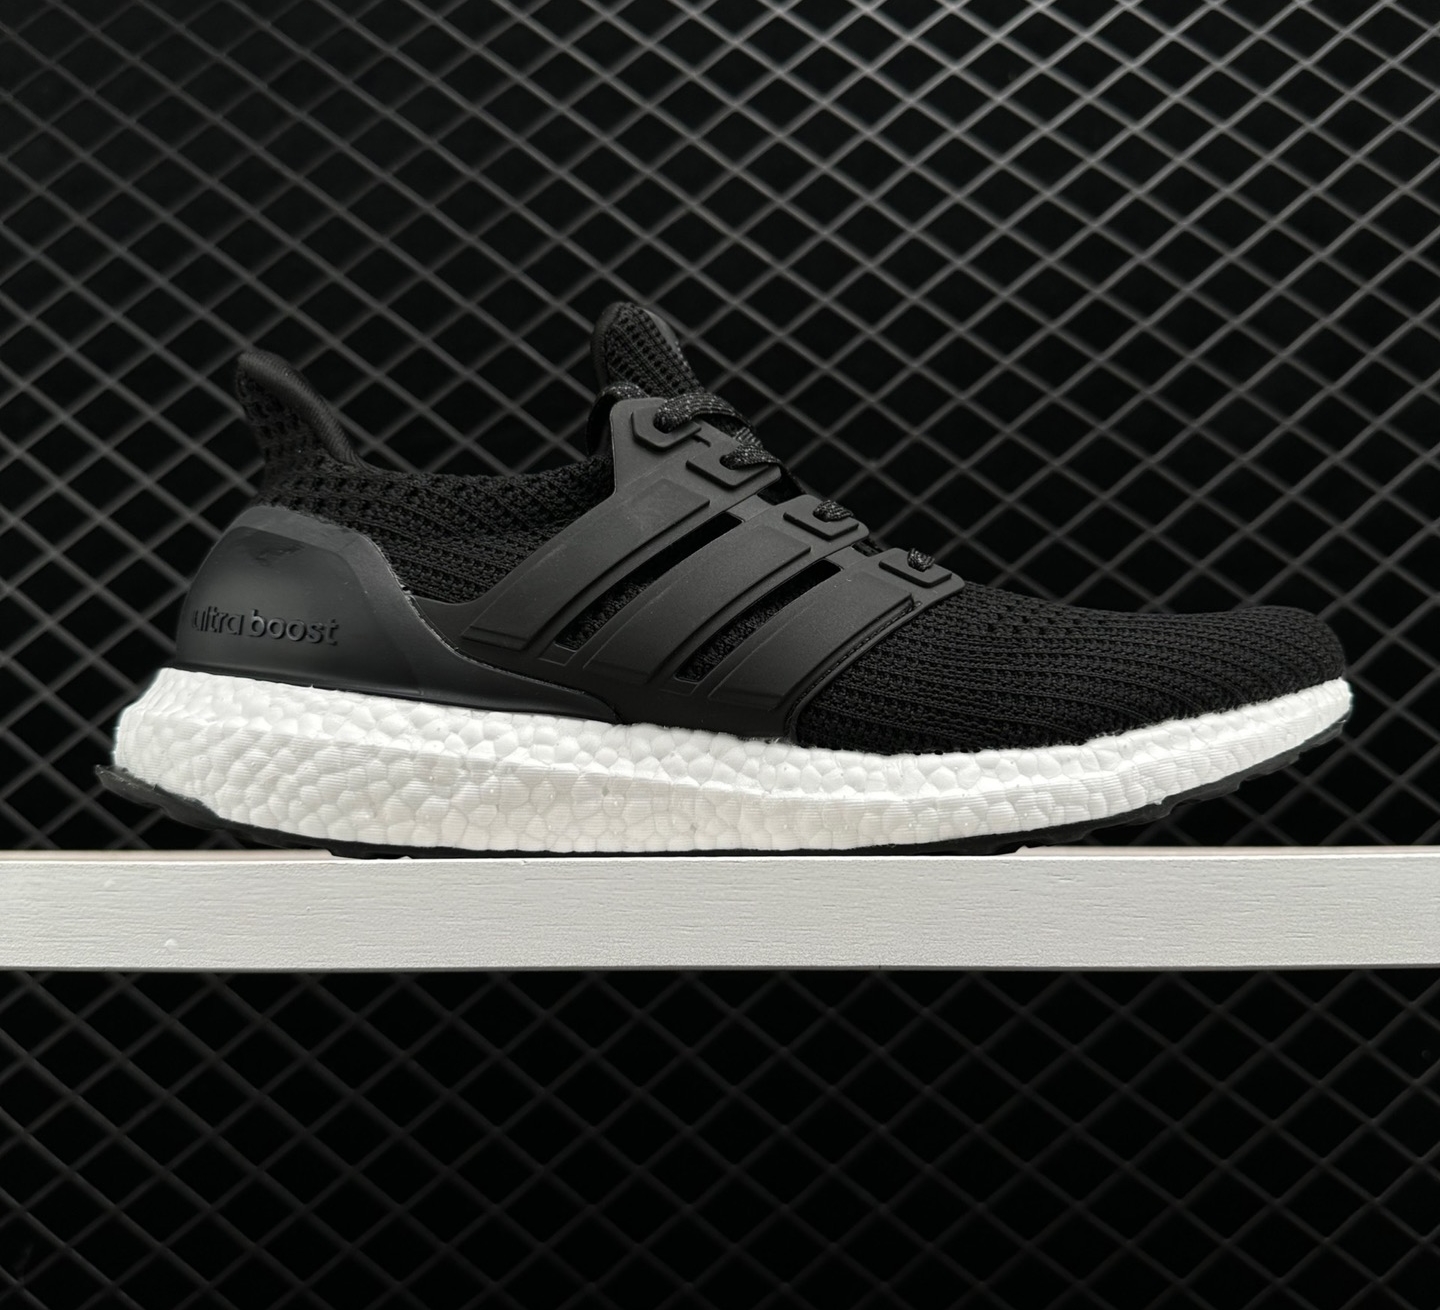 Adidas UltraBoost 4.0 Core Black Shoes - Buy Online Now!